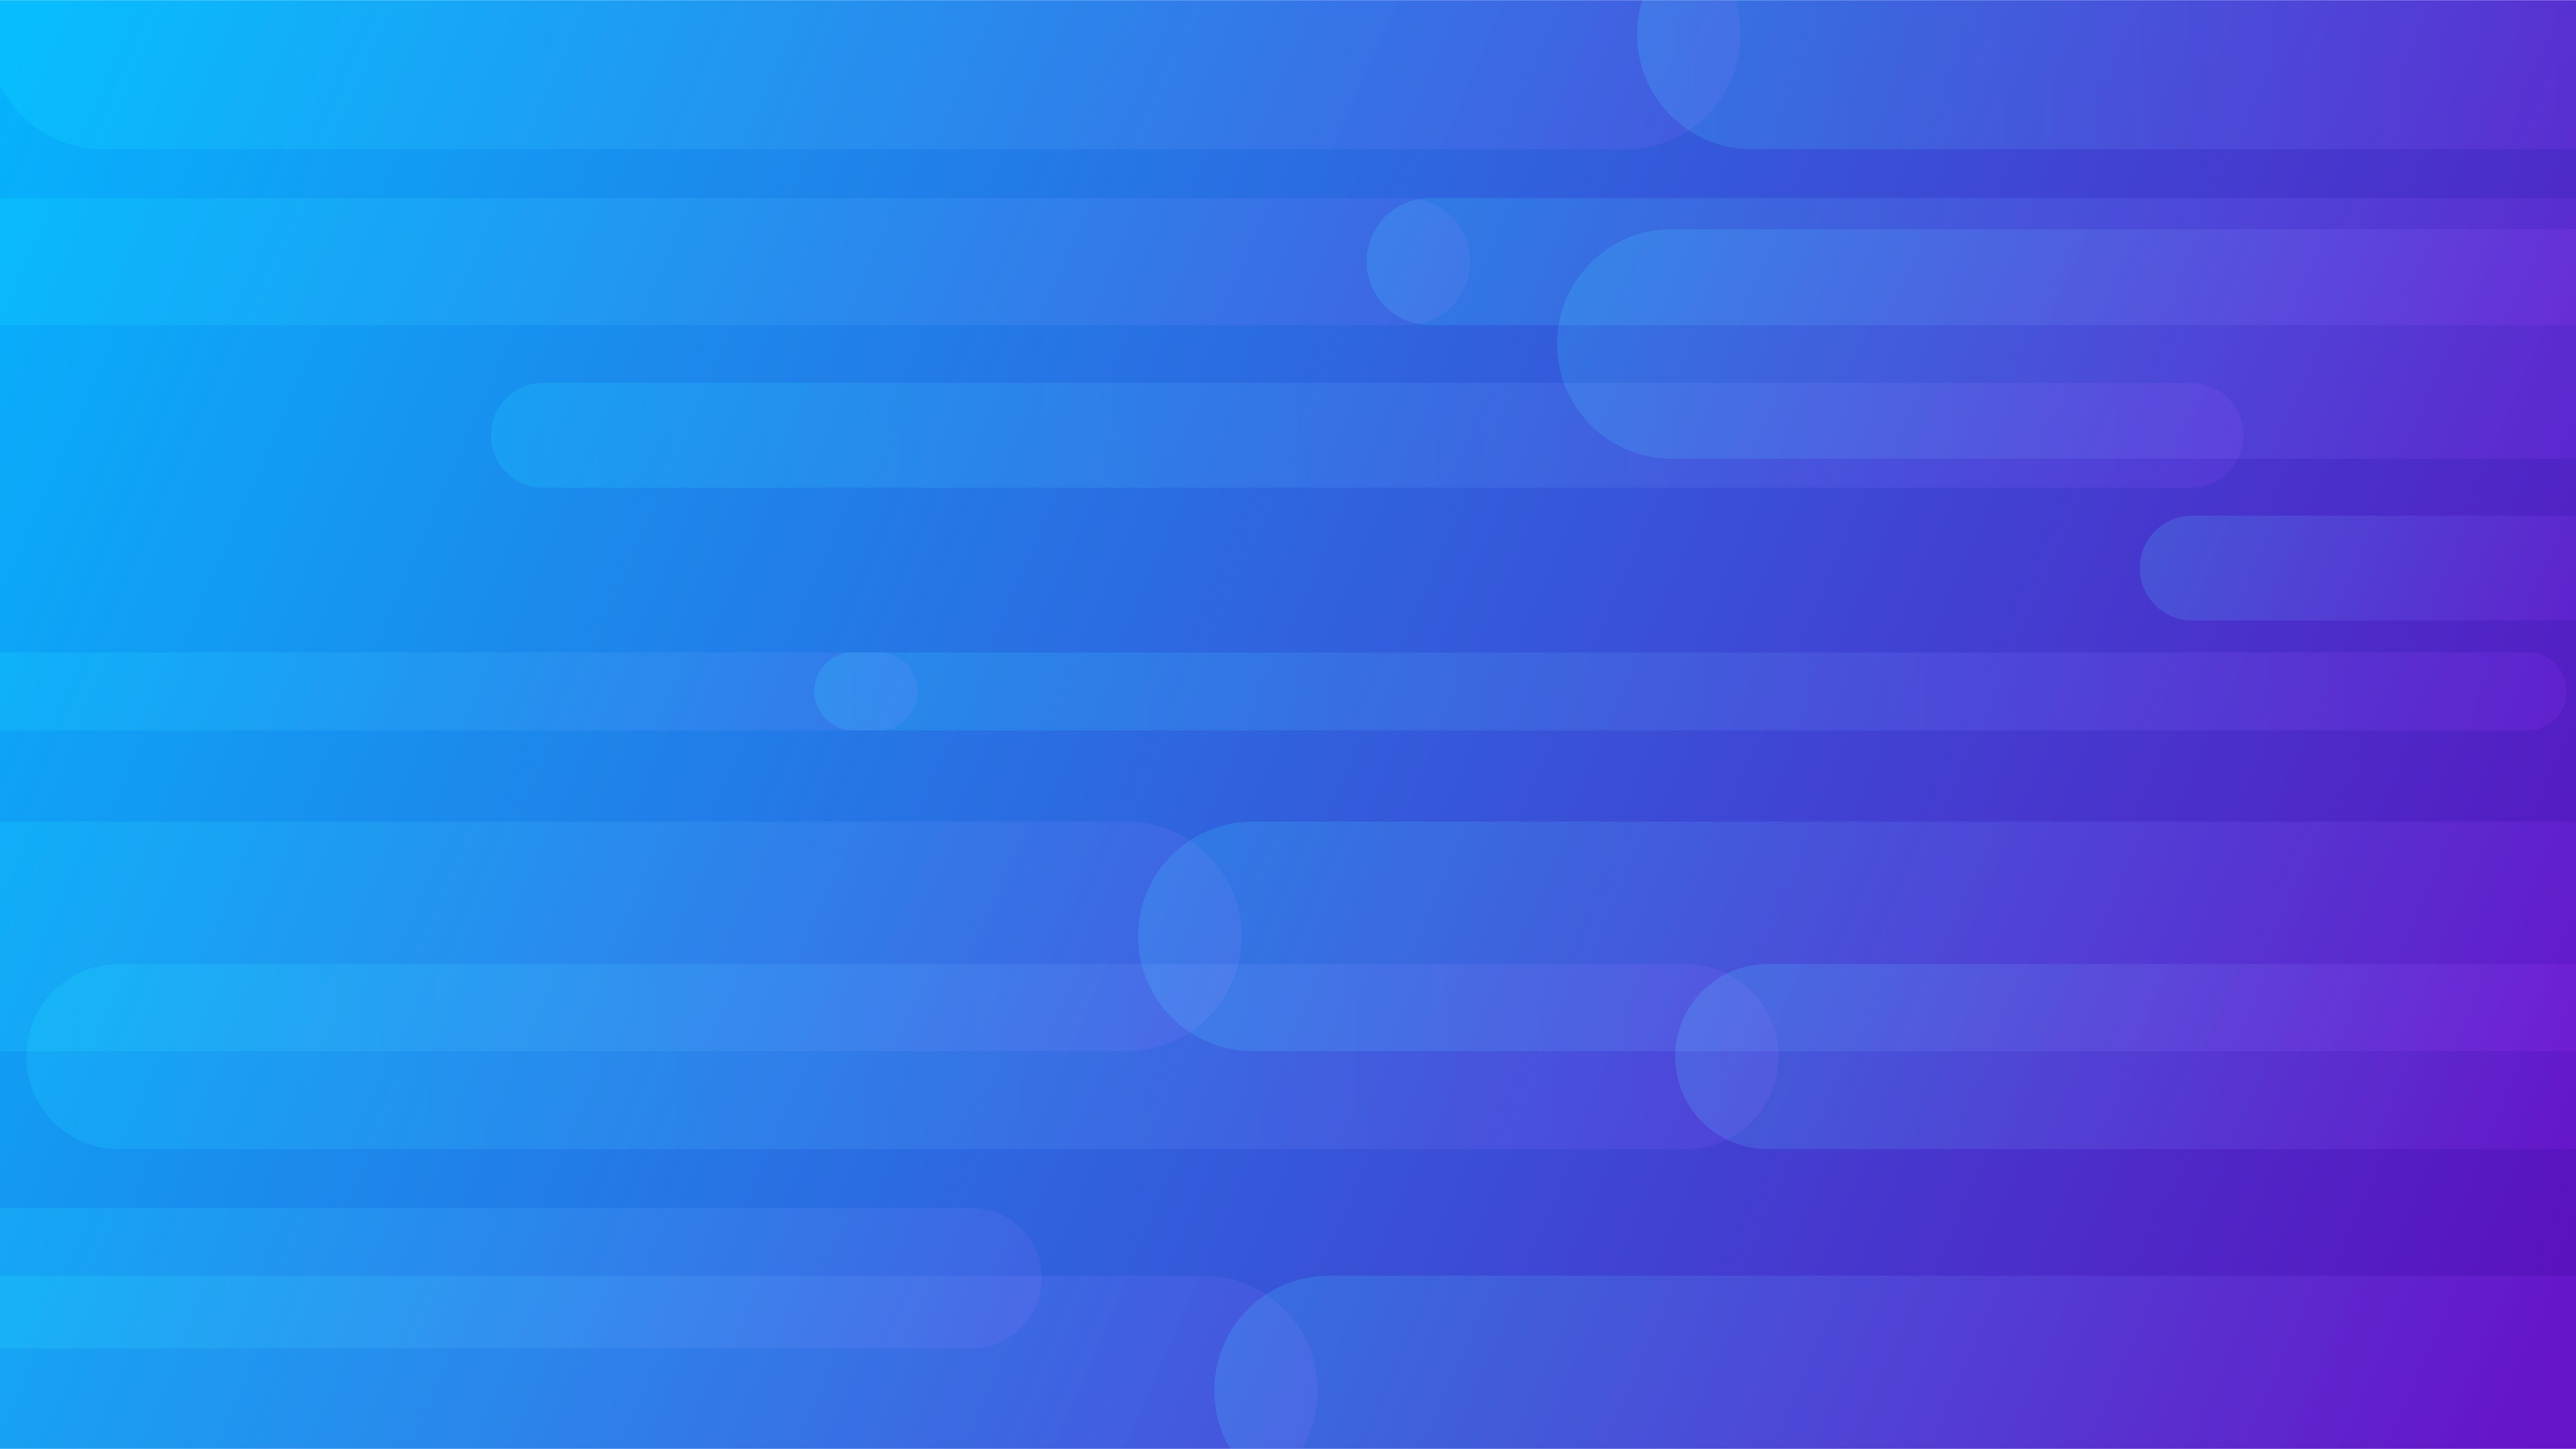 Blue and purple gradient rounded lines design - Download Free Vectors